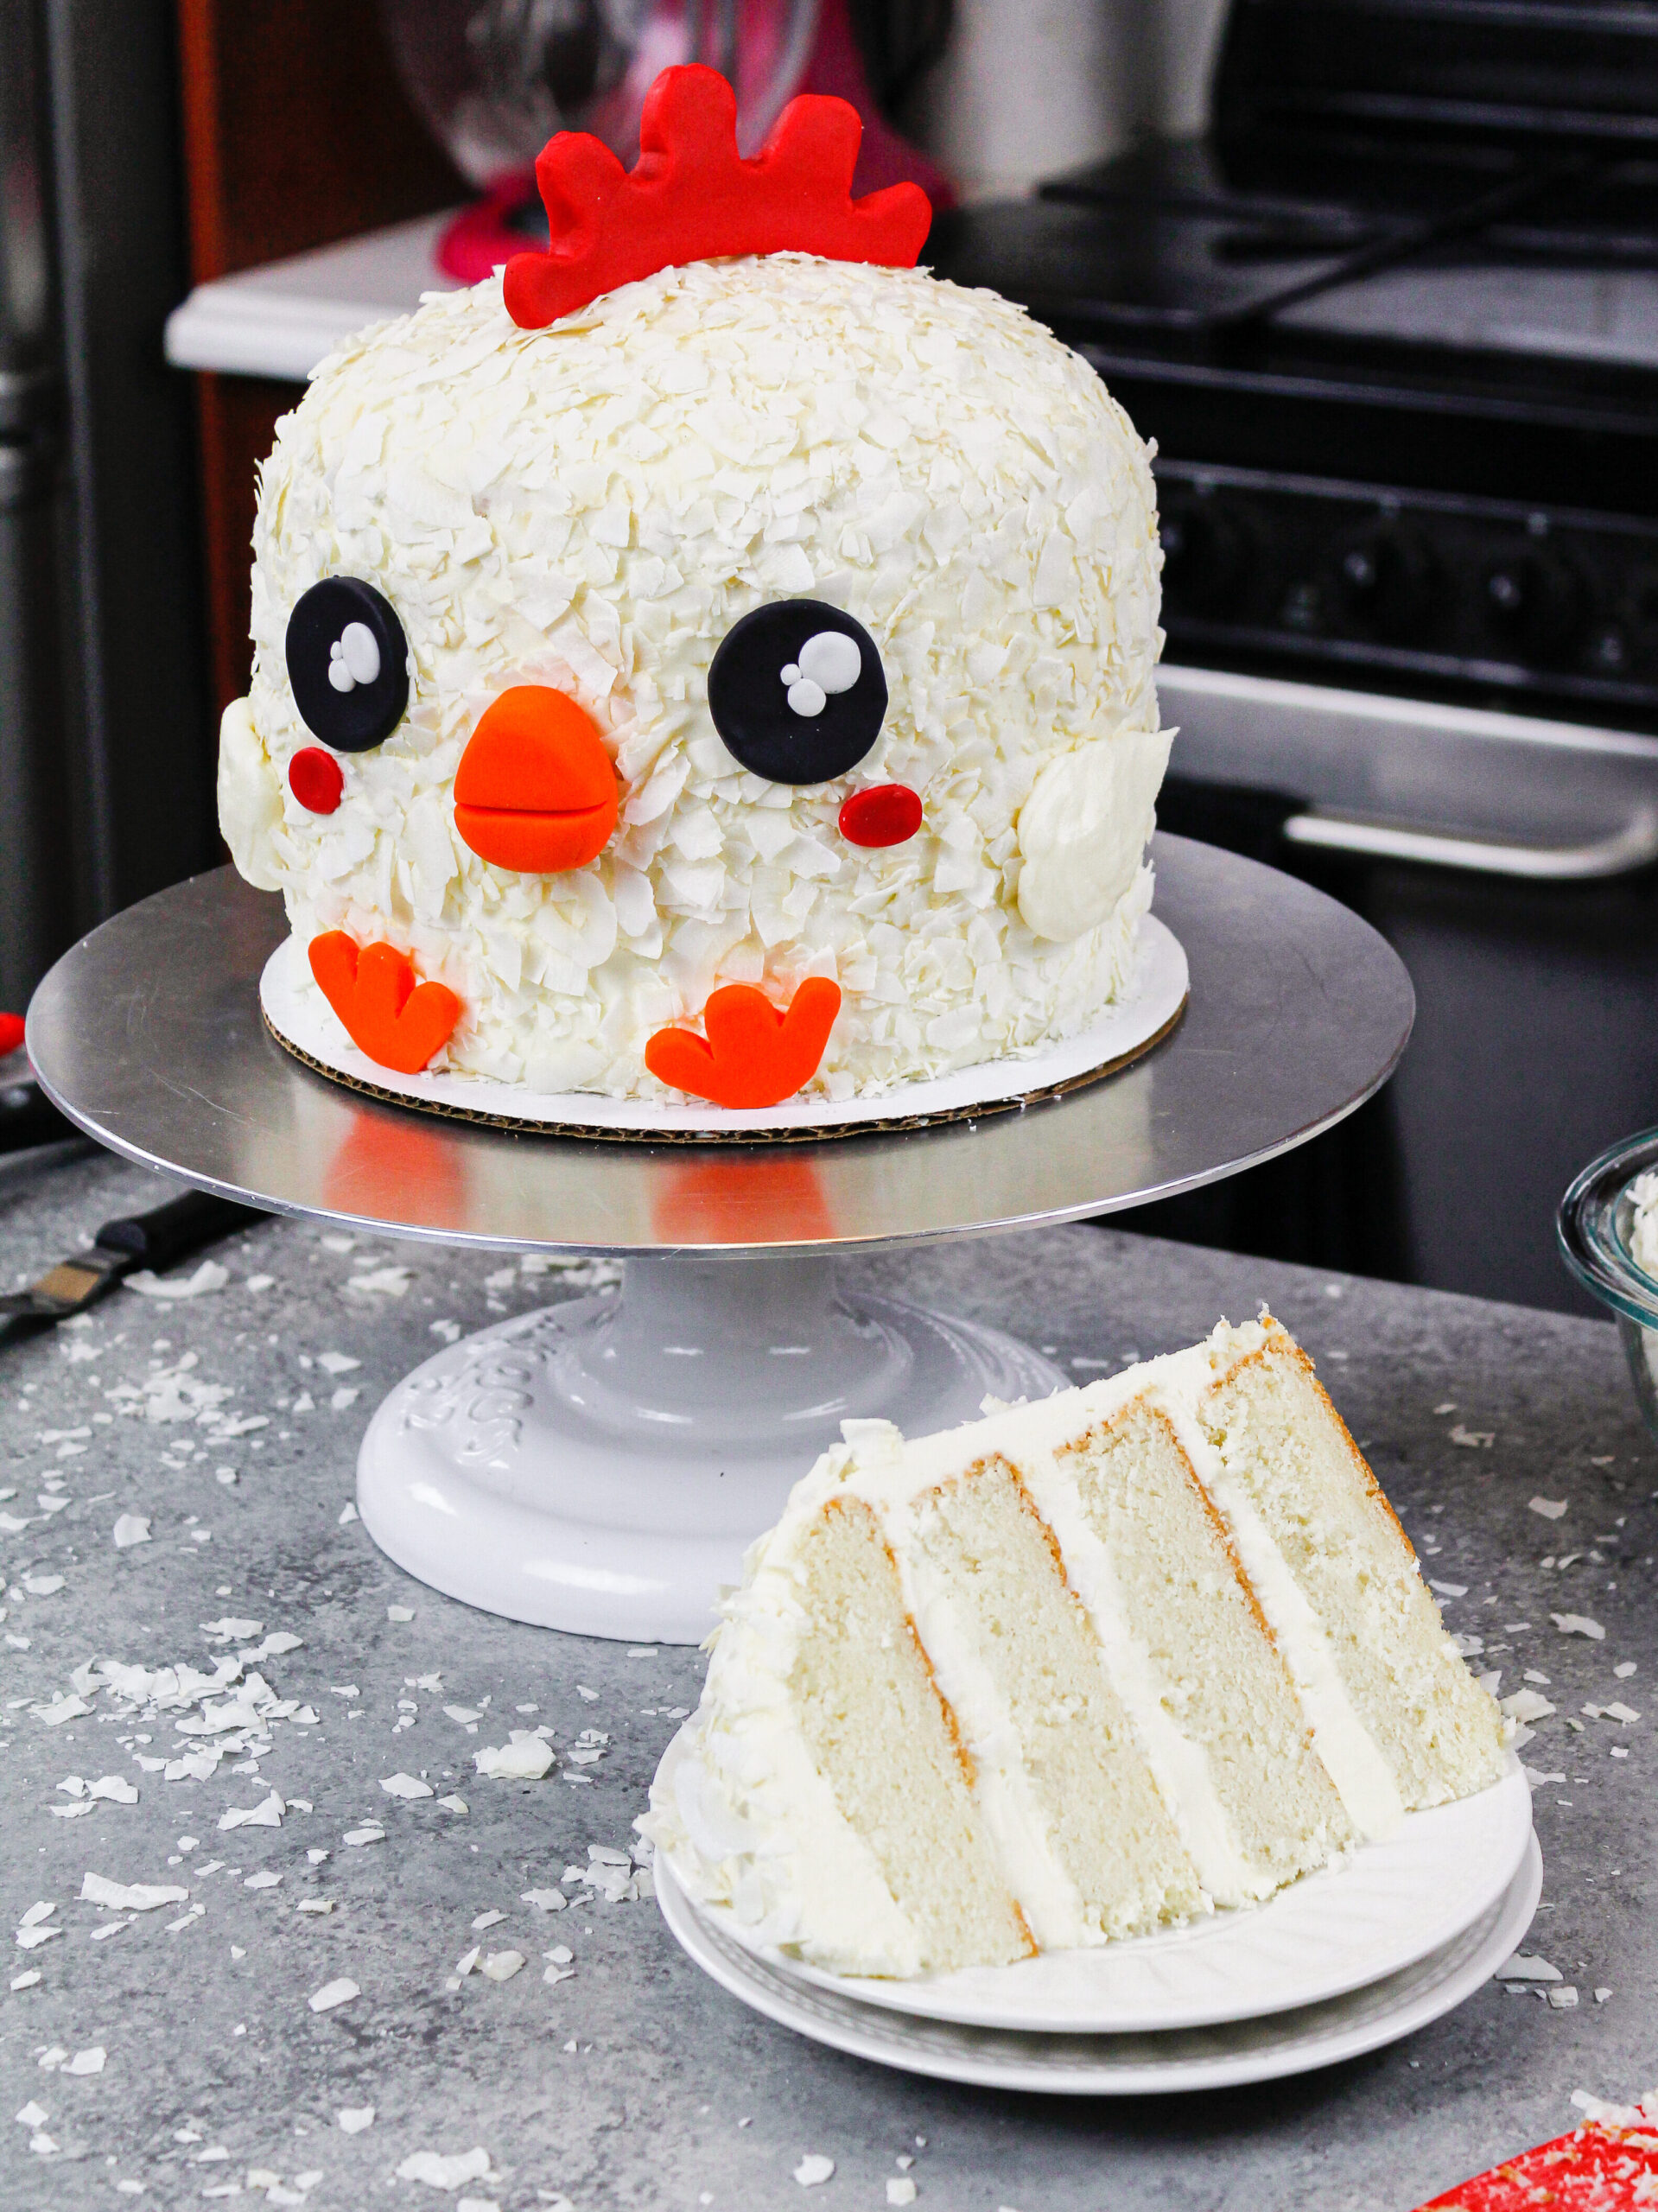 image of a chicken cake that's been sliced into to show it's fluffy cake layers